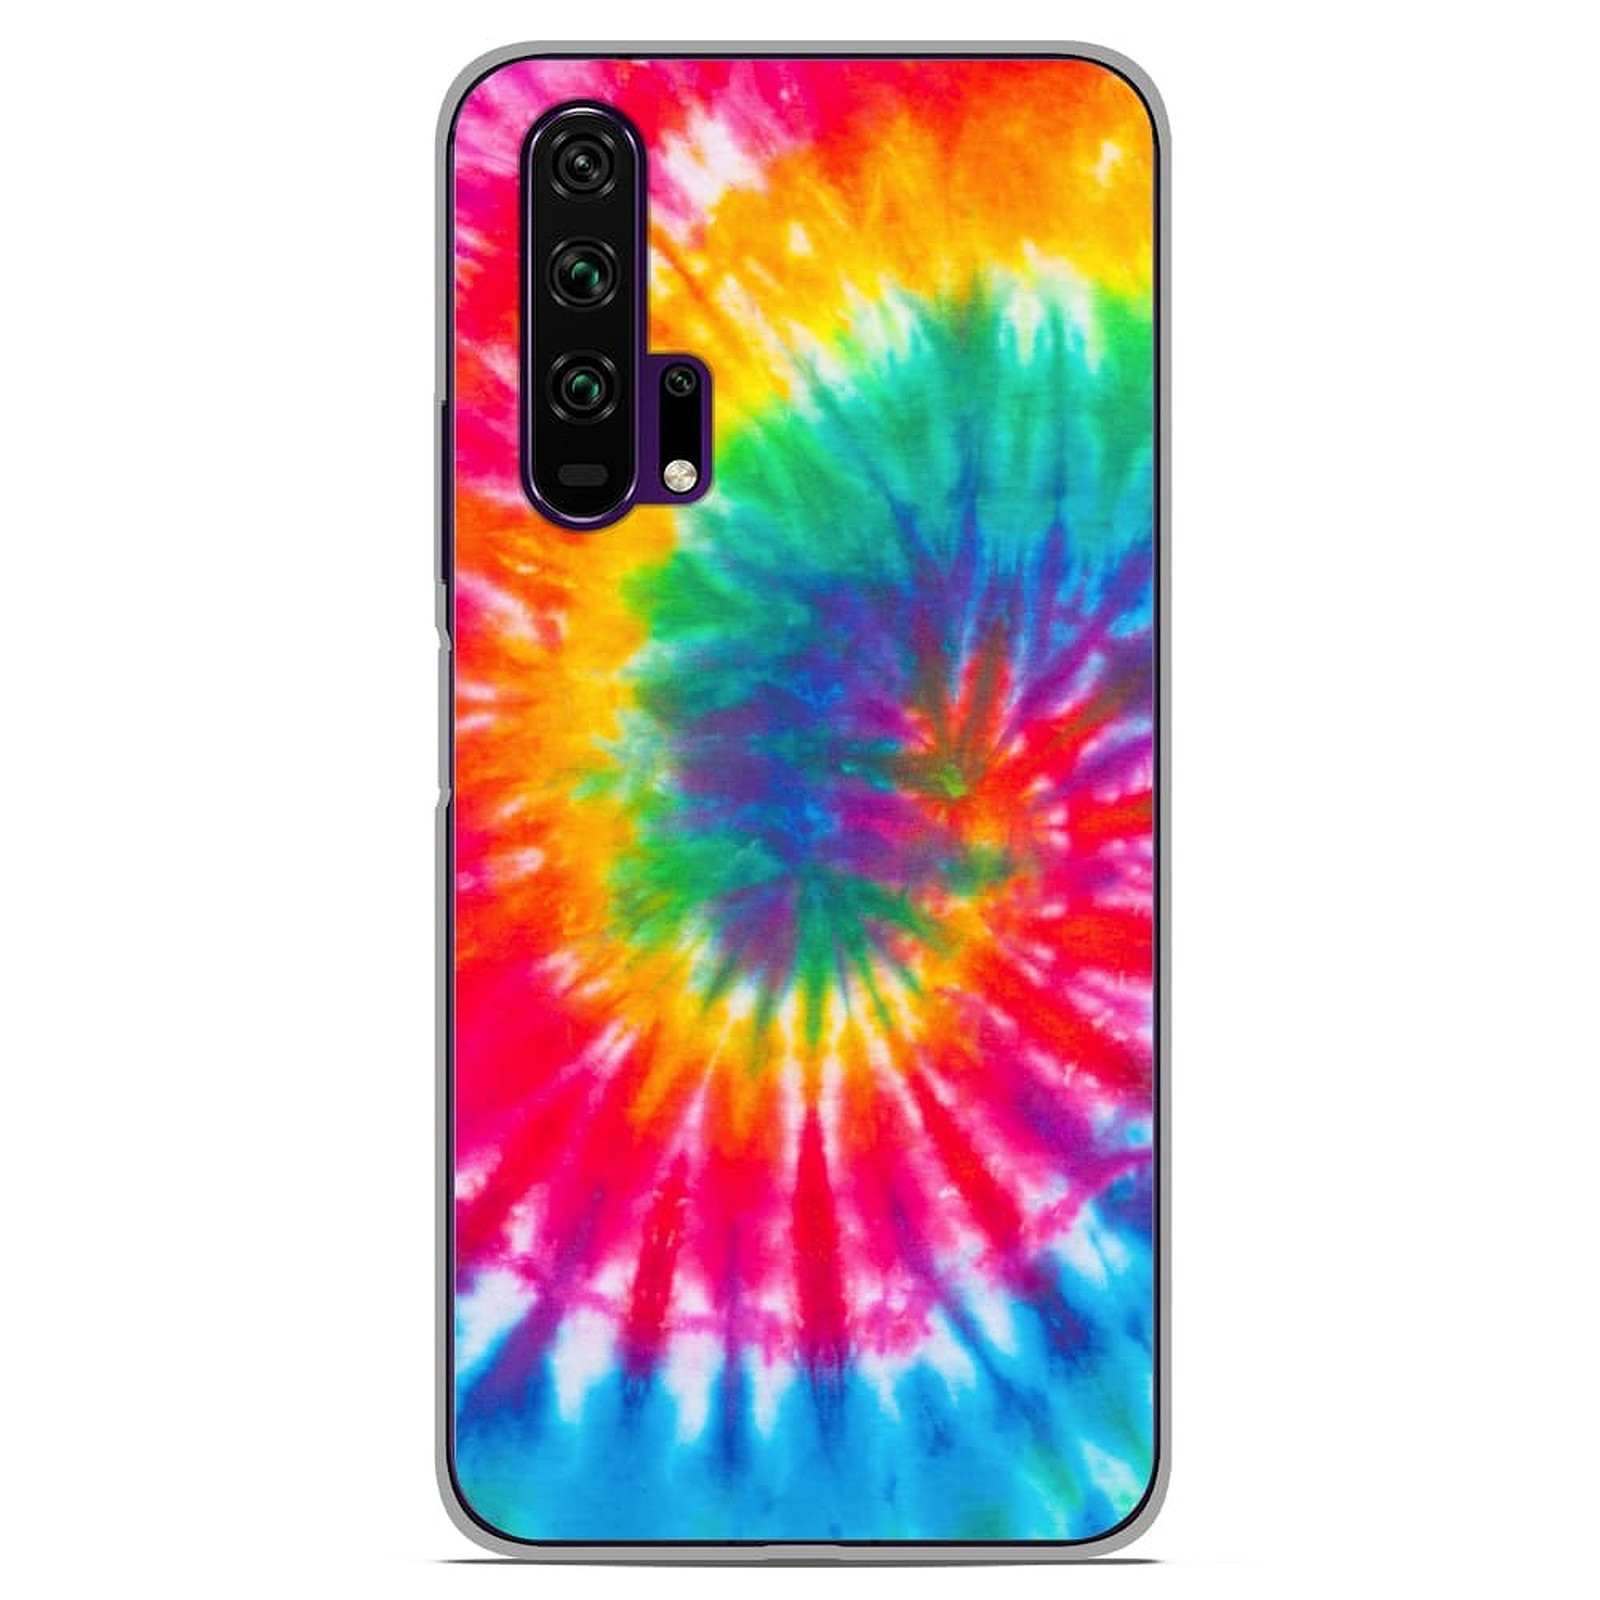 1001 Coques Coque silicone gel Huawei Honor 20 Pro motif Tie Dye Spirale - Coque telephone 1001Coques